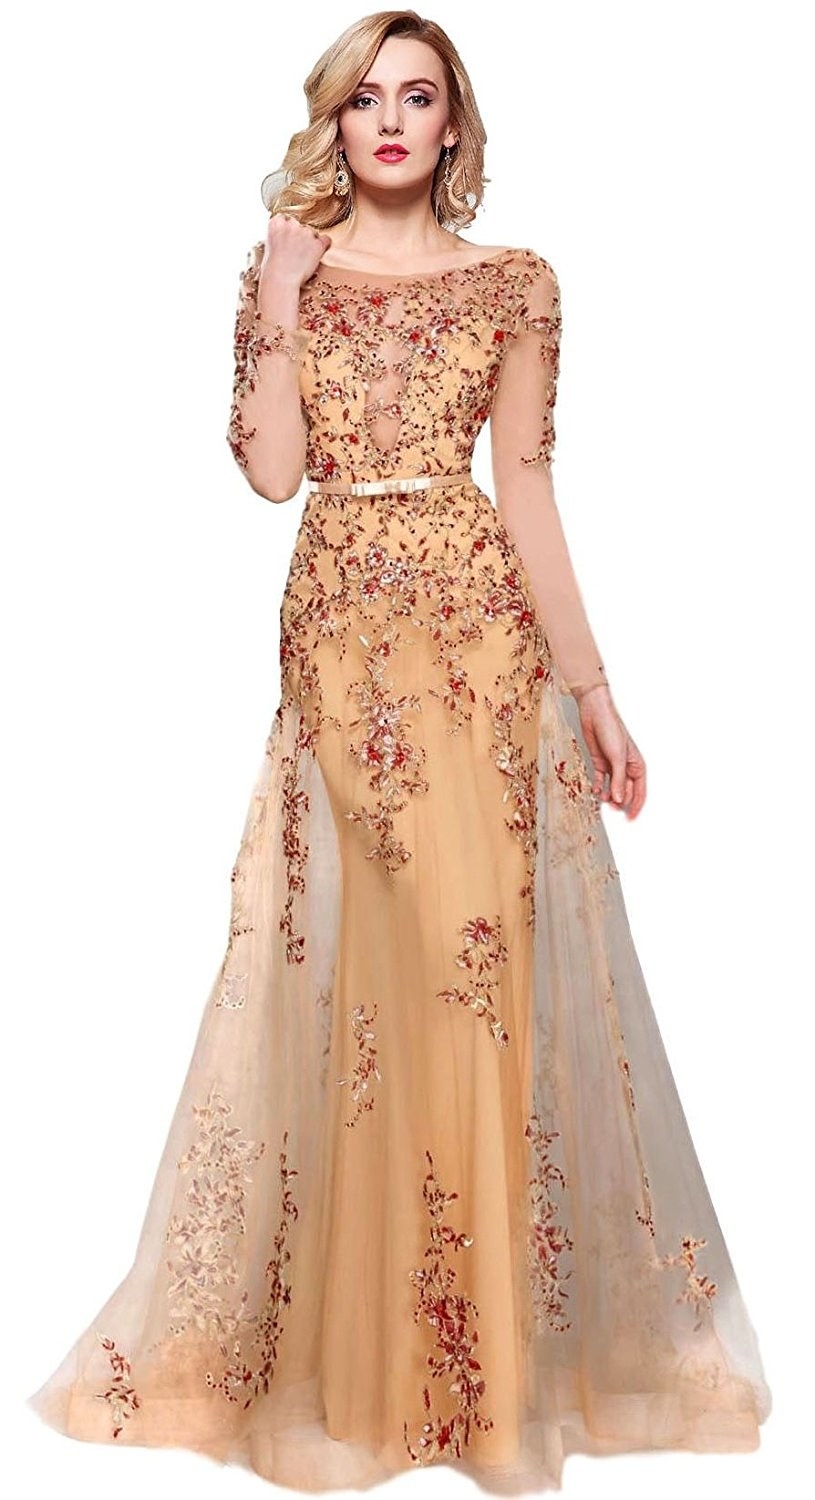 45 Of The Best Prom Dresses You Can Get On Amazon In 2019